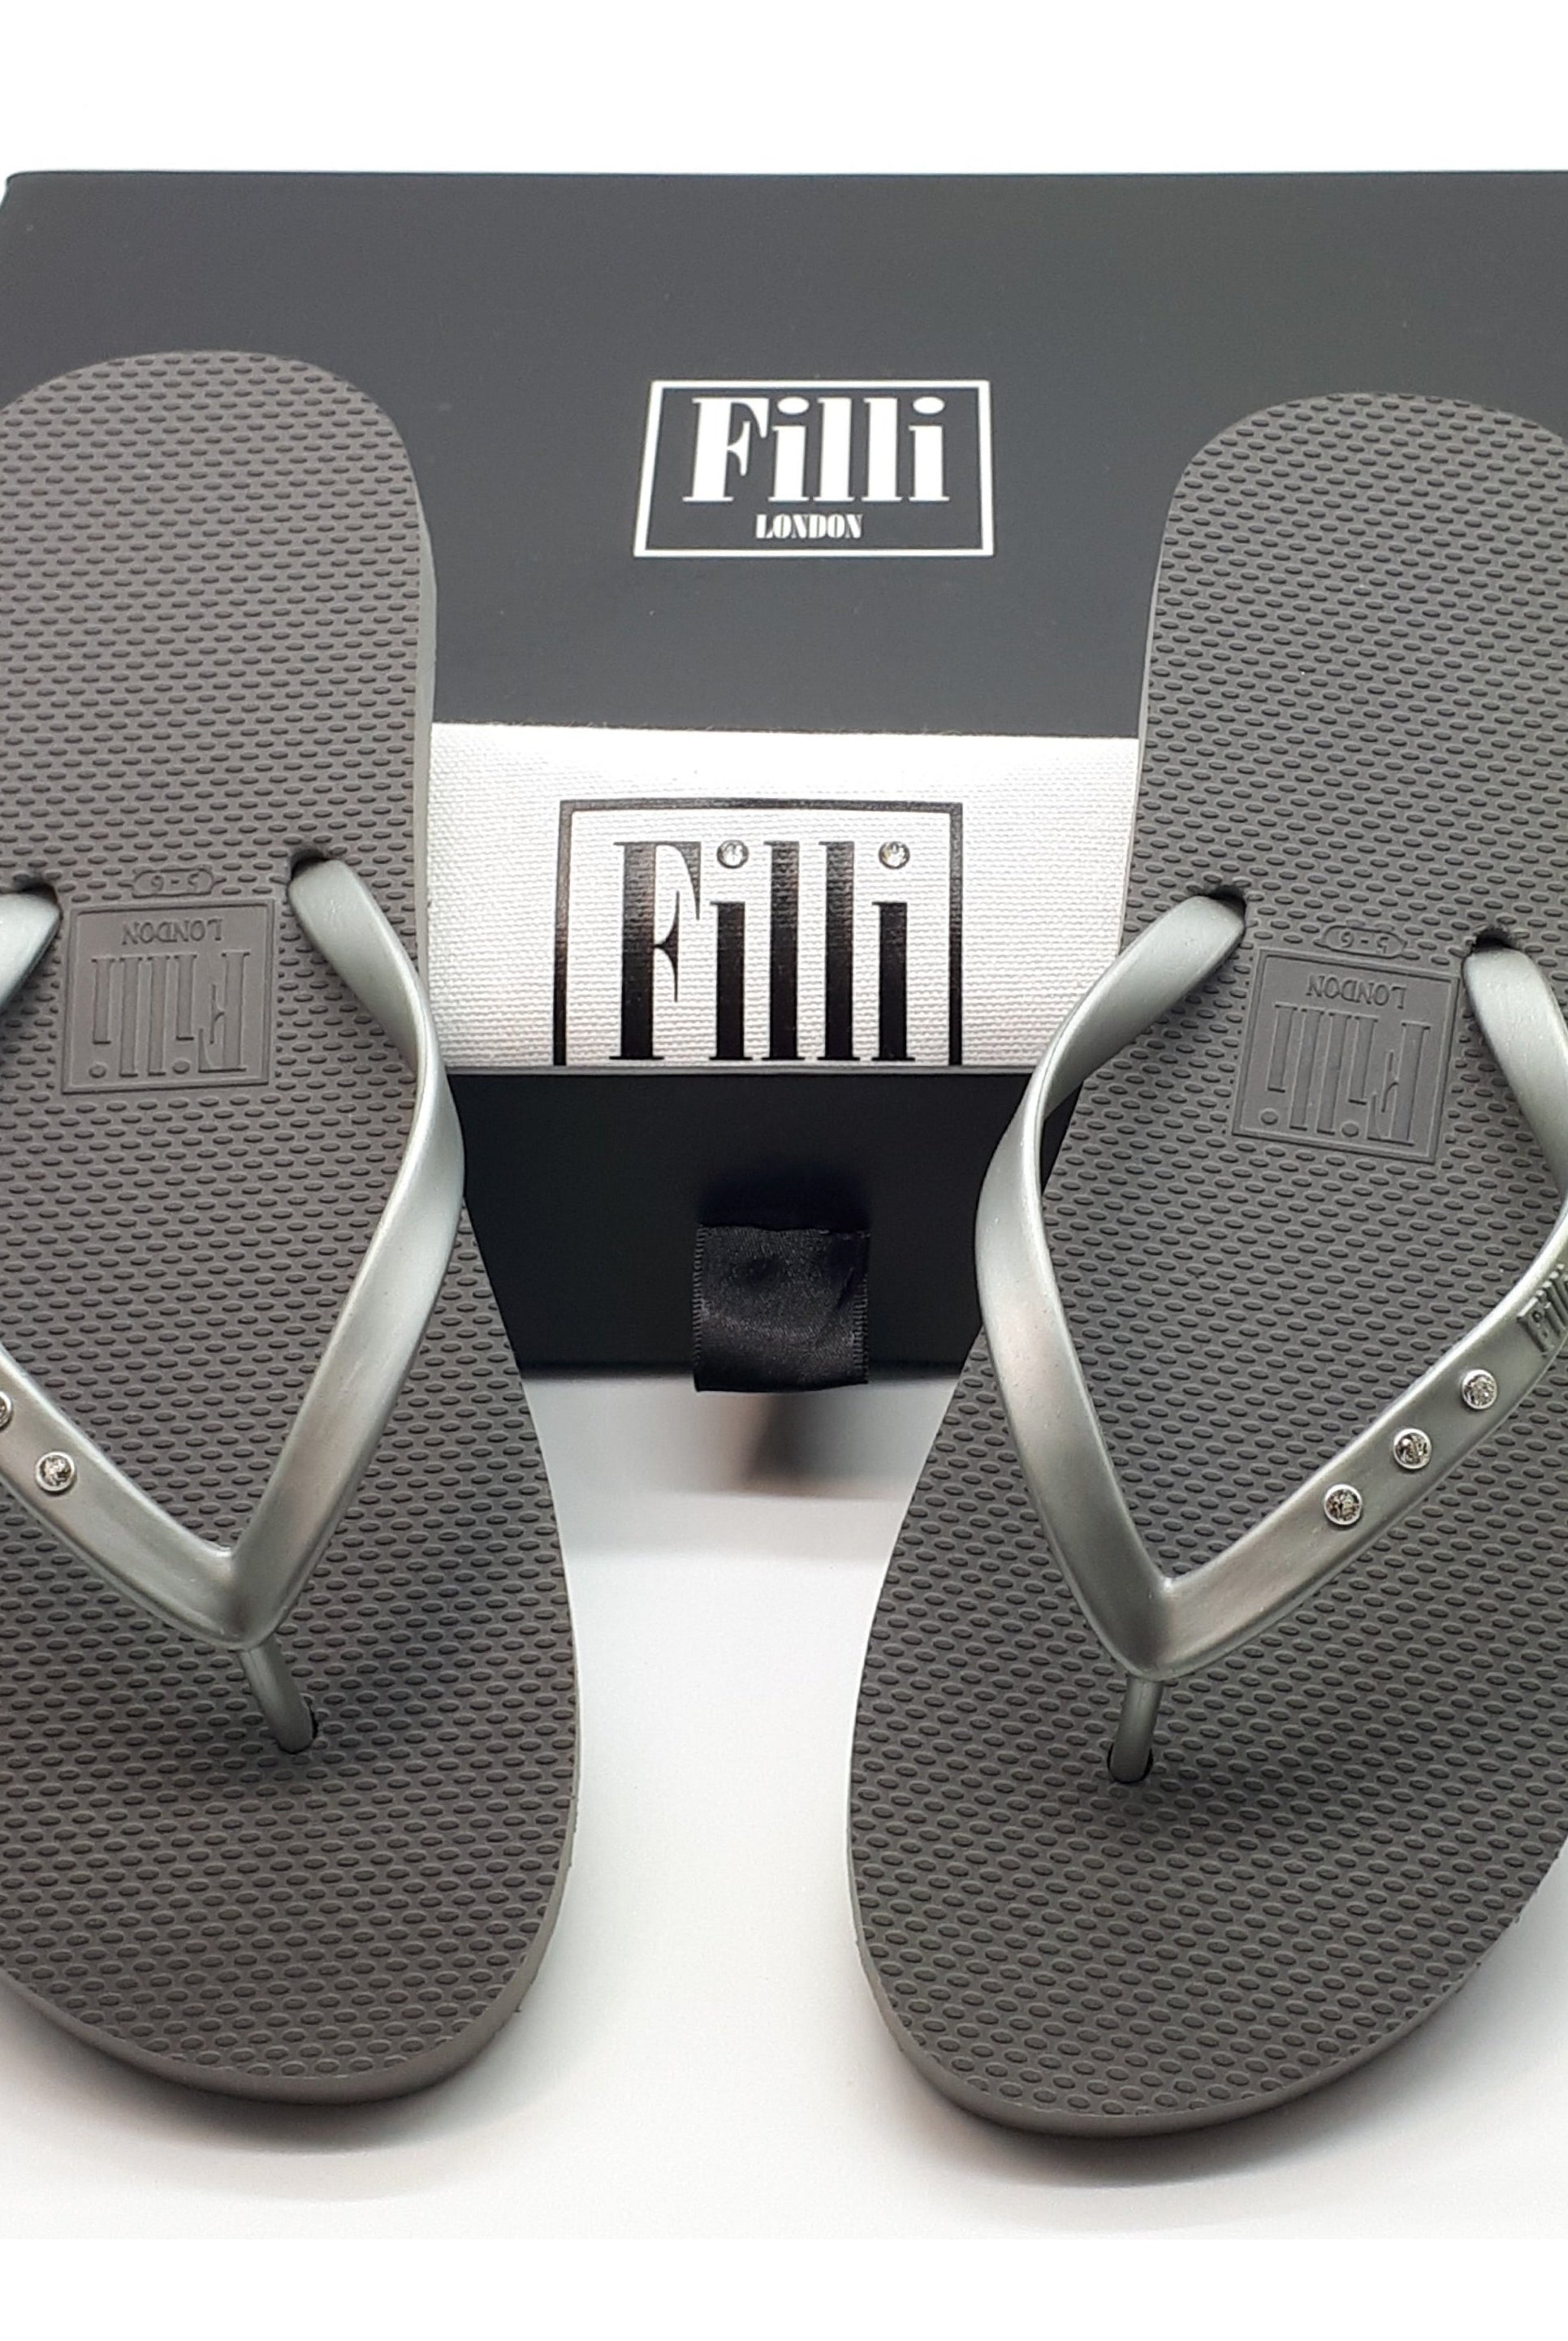 Philly Luxury Rubber Flip-Flops in grey, hand-embellished with Swarovski crystals, presented in a premium box with a travel bag.